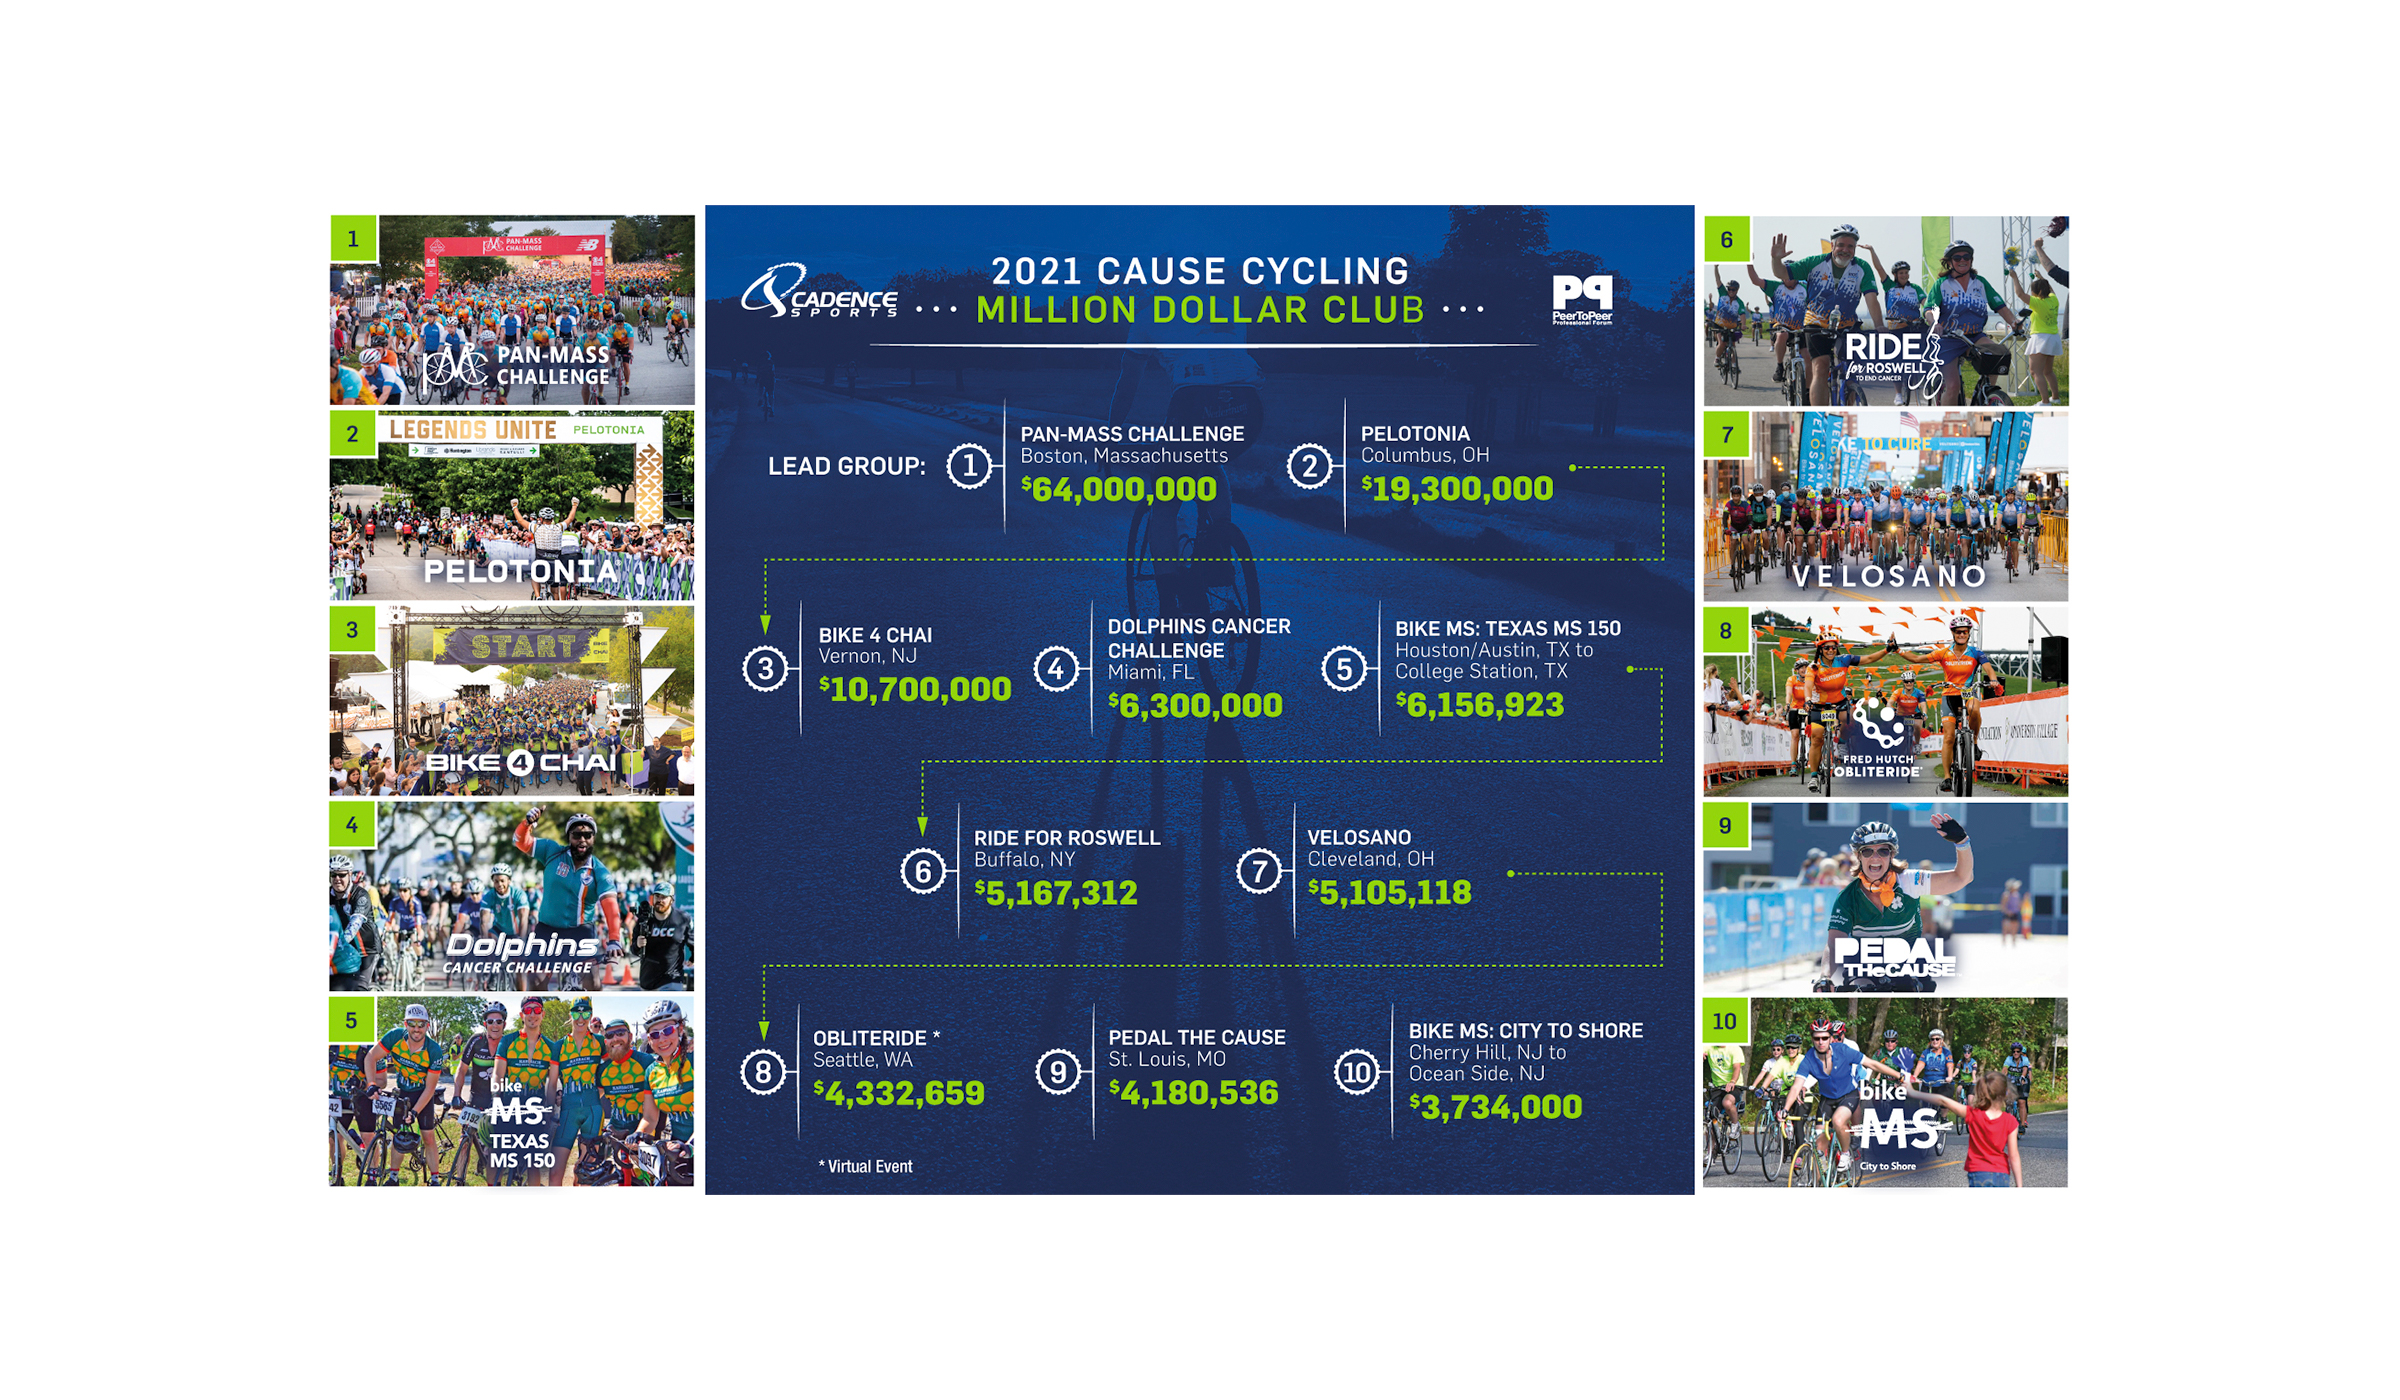 The PMC Is the #1 Cause-Related Cycling Organization in the Country